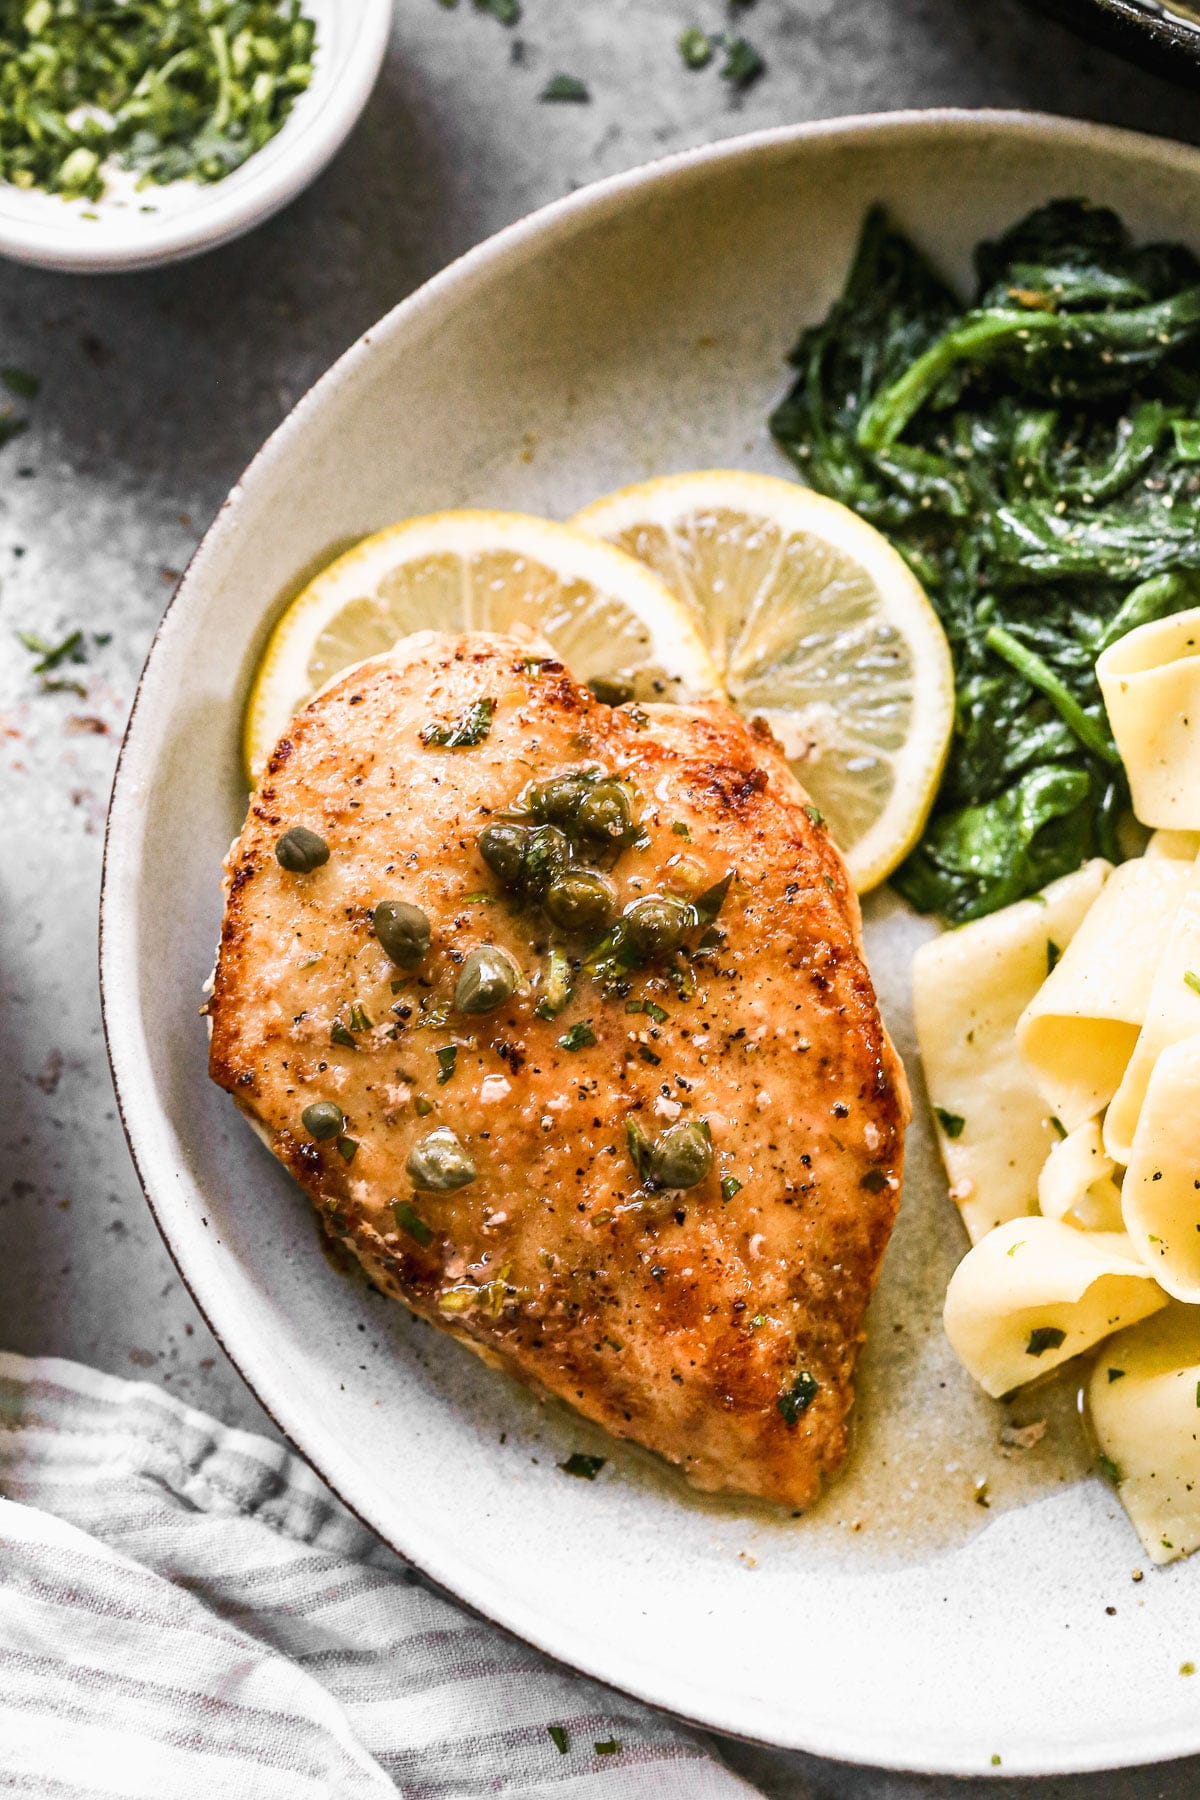 This Healthy Chicken Piccata Recipe&nbsp;will quickly become your new favorite weeknight dinner! Thin chicken breasts are sautéed in butter until crusty and golden brown, then smothered in a zippy lemon and white wine butter sauce. Easy, light and so delicious!&nbsp;